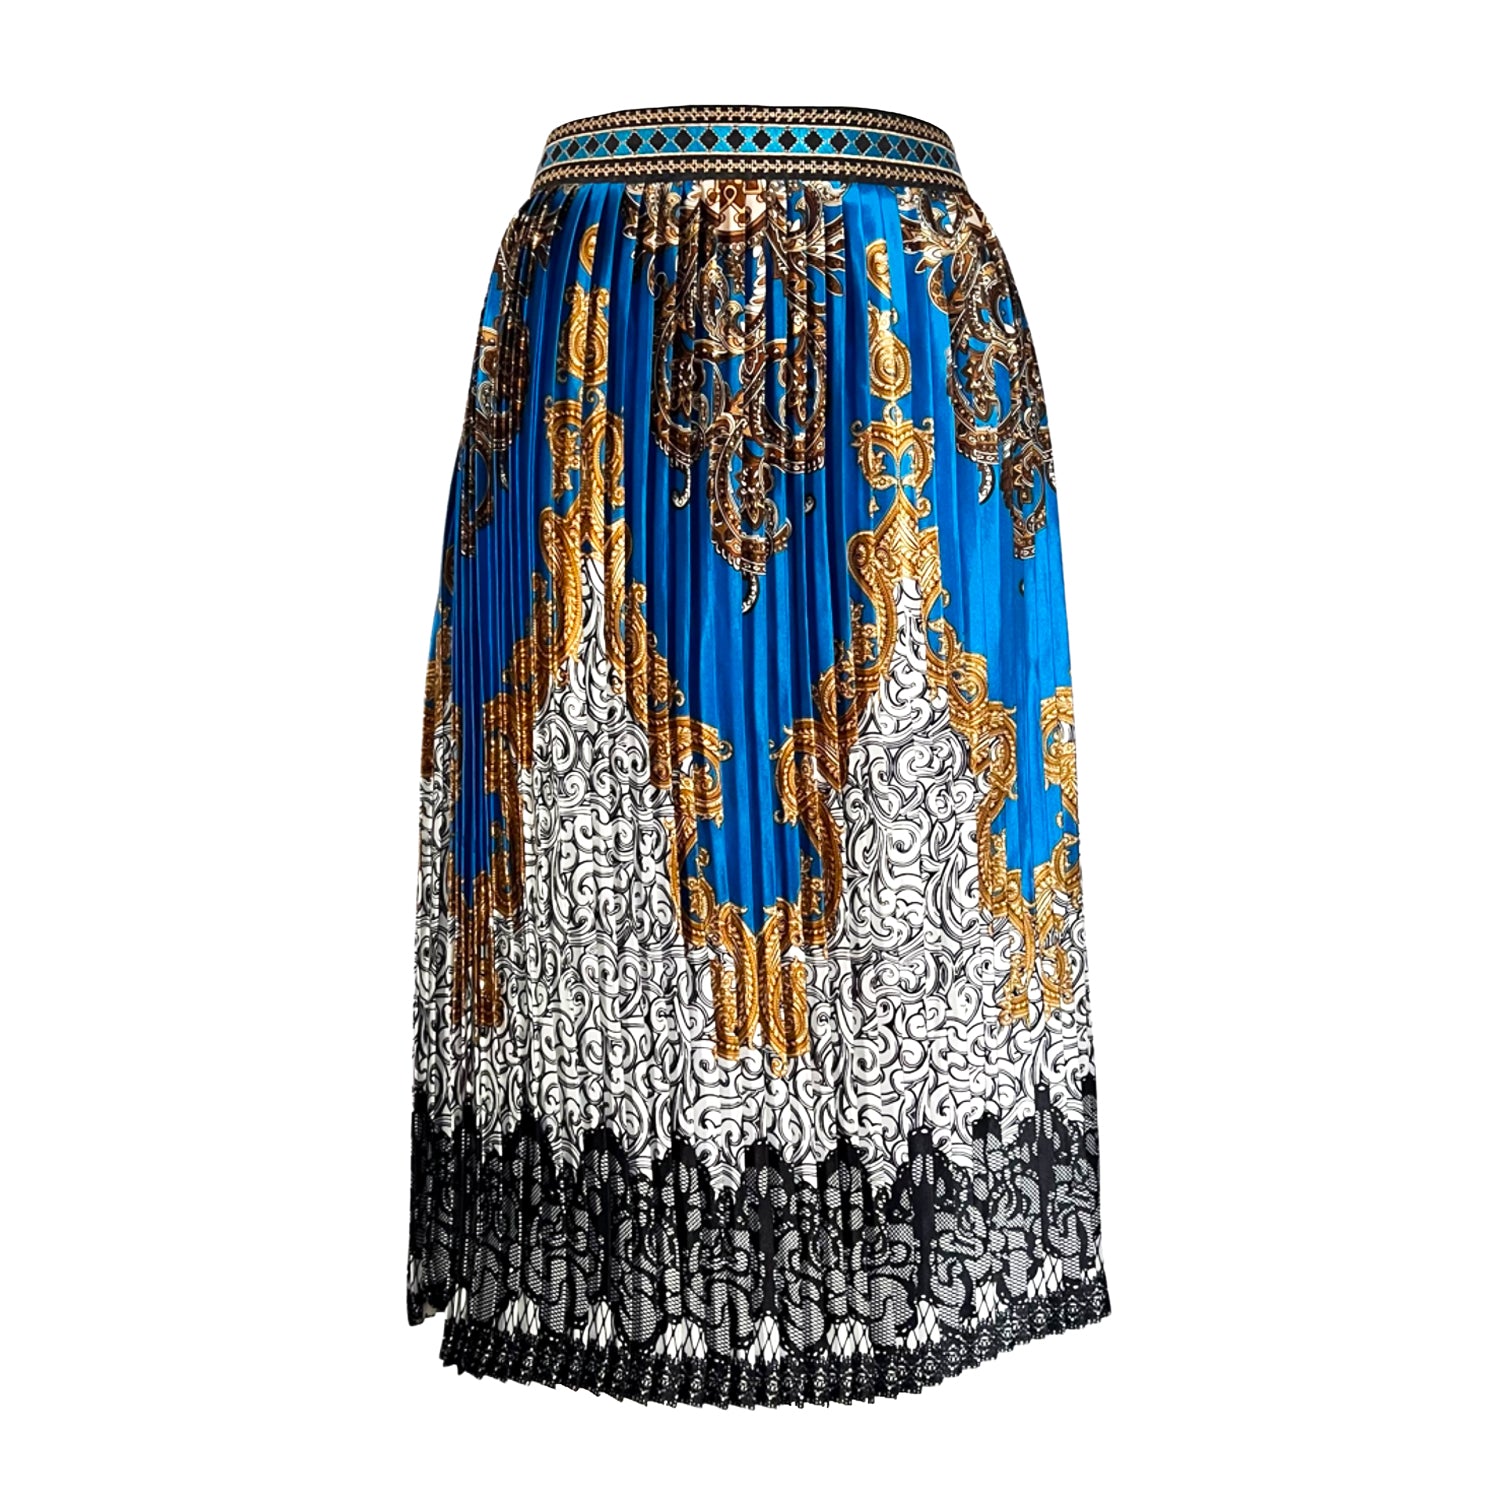 Embroidered Pleated Scarf Midi Skirt in Cobalt Blue